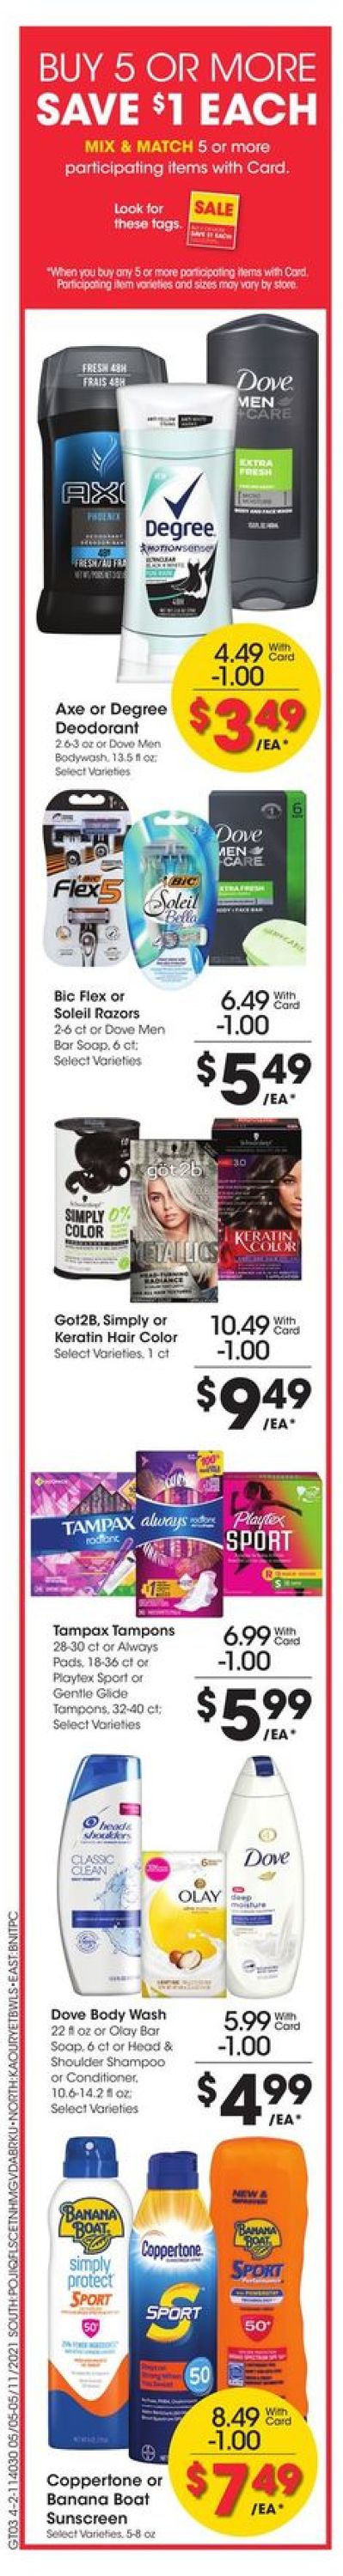 Fred Meyer Weekly Ad Circular - valid 05/05-05/11/2021 (Page 4)